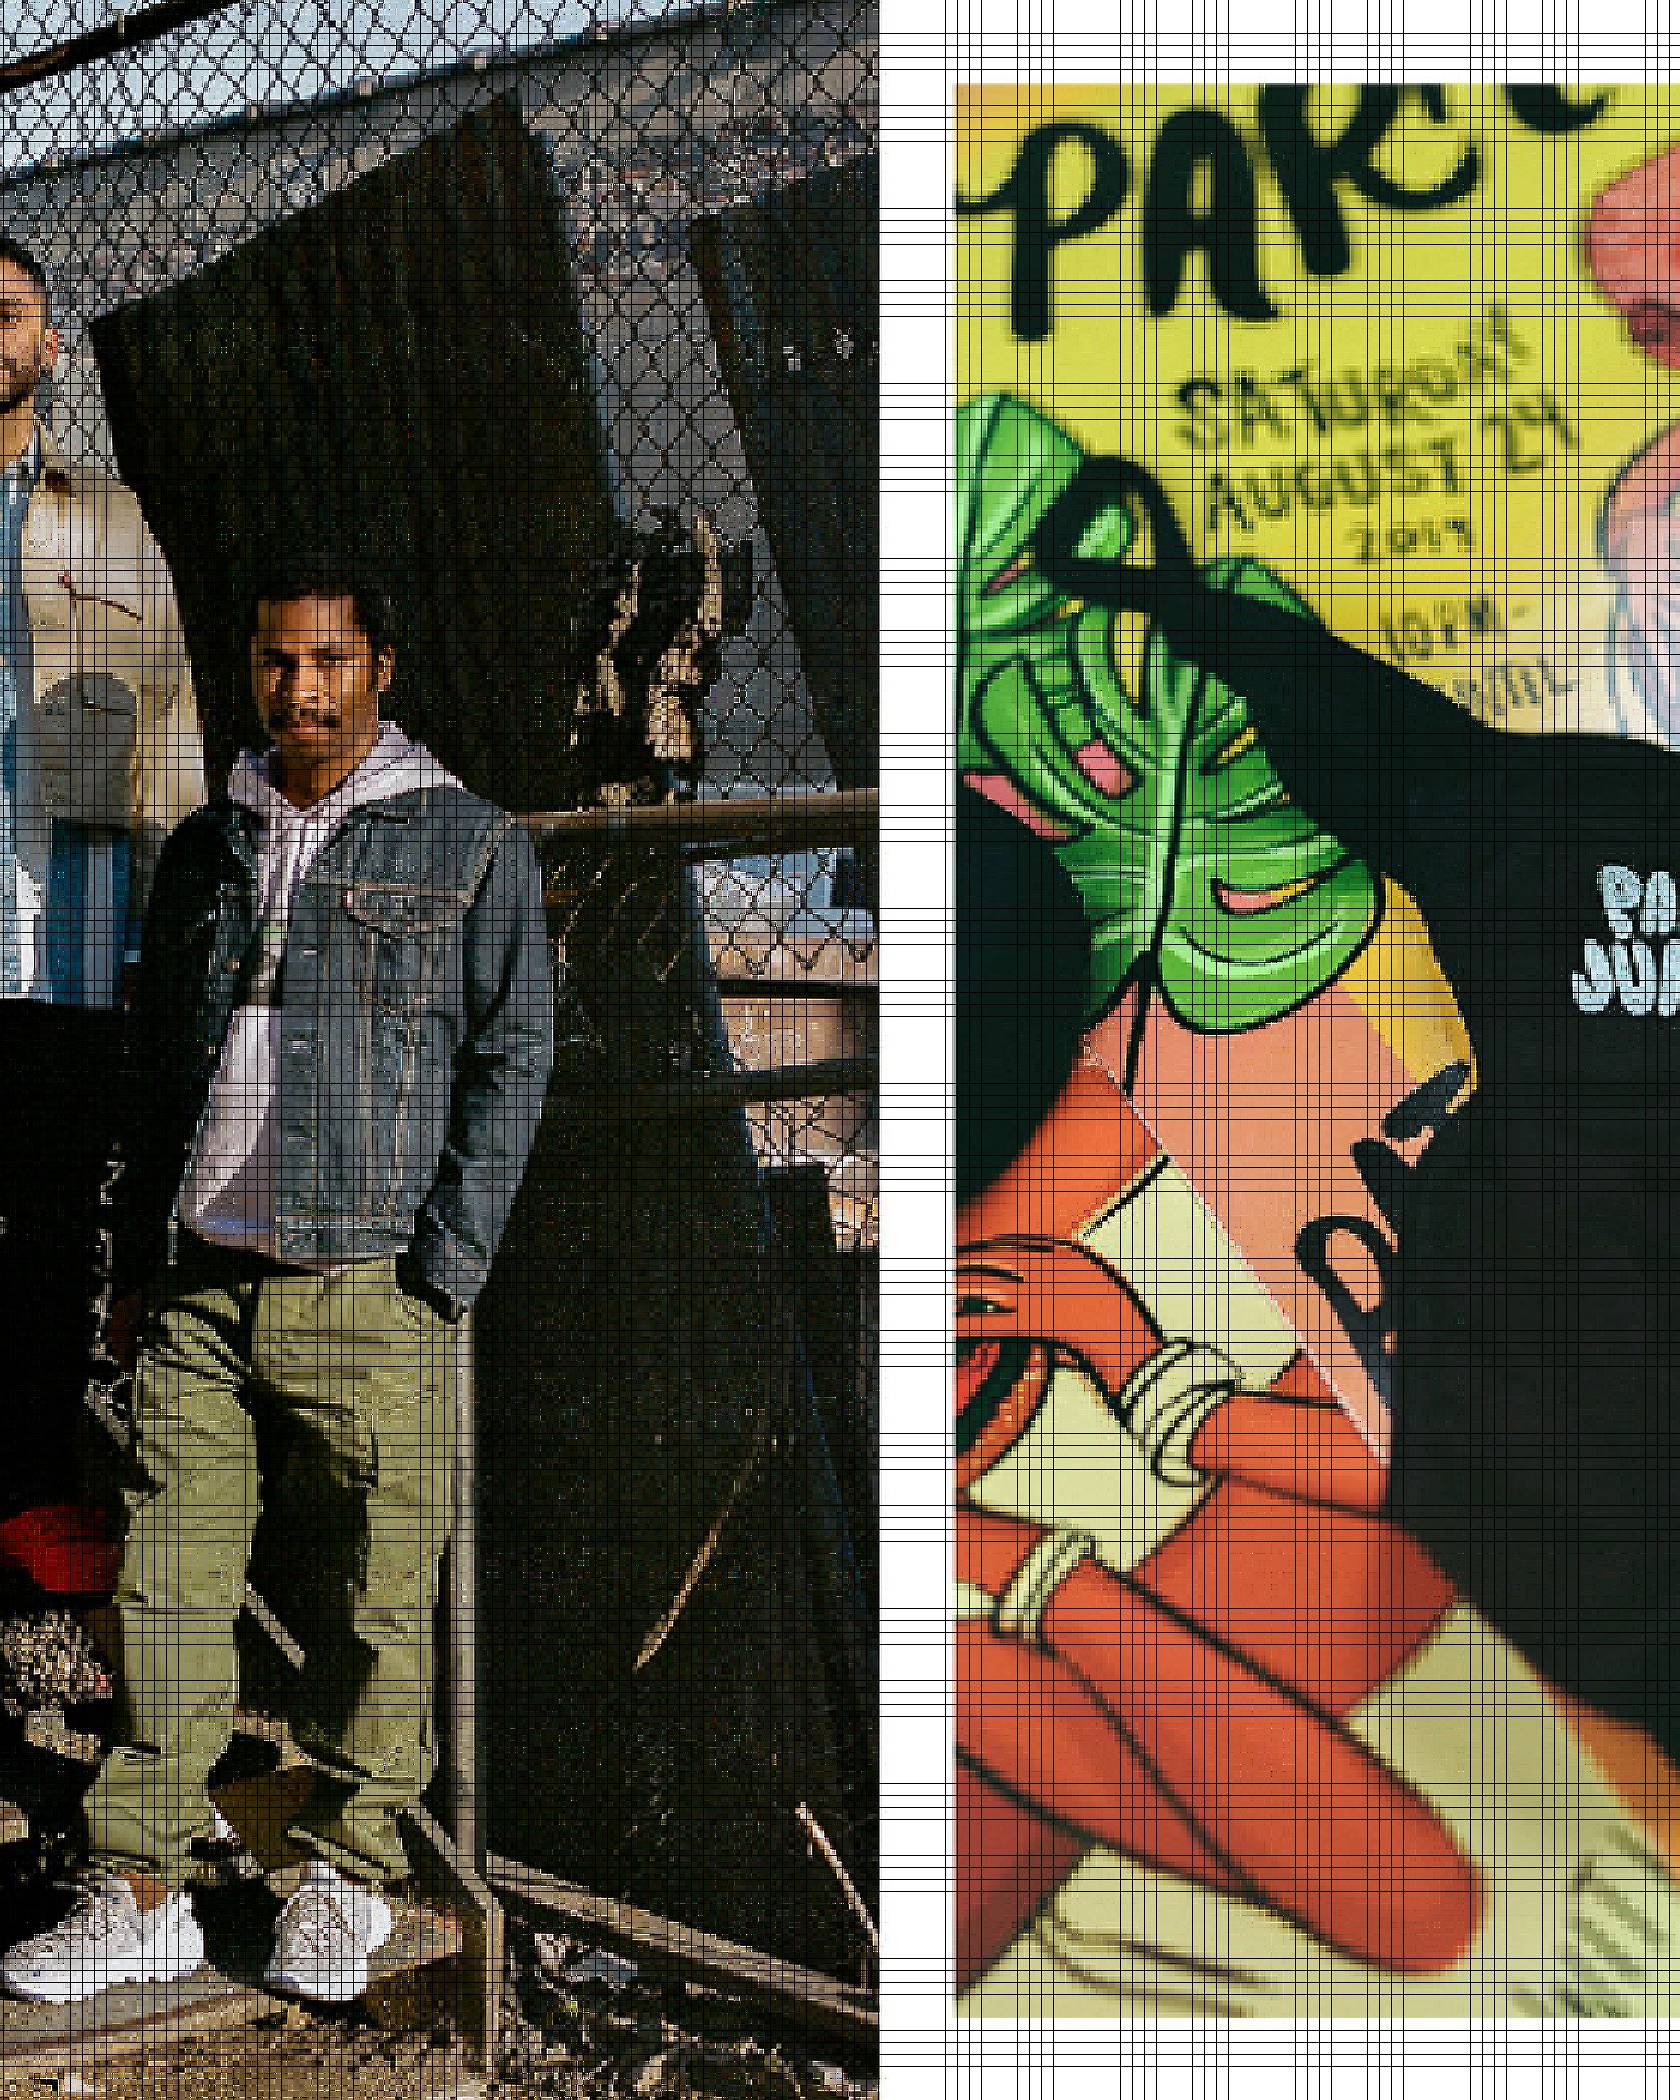 Left: Portrait of the Papi Juice collective standing outside. Right: Close-up of Papi Juice merch.